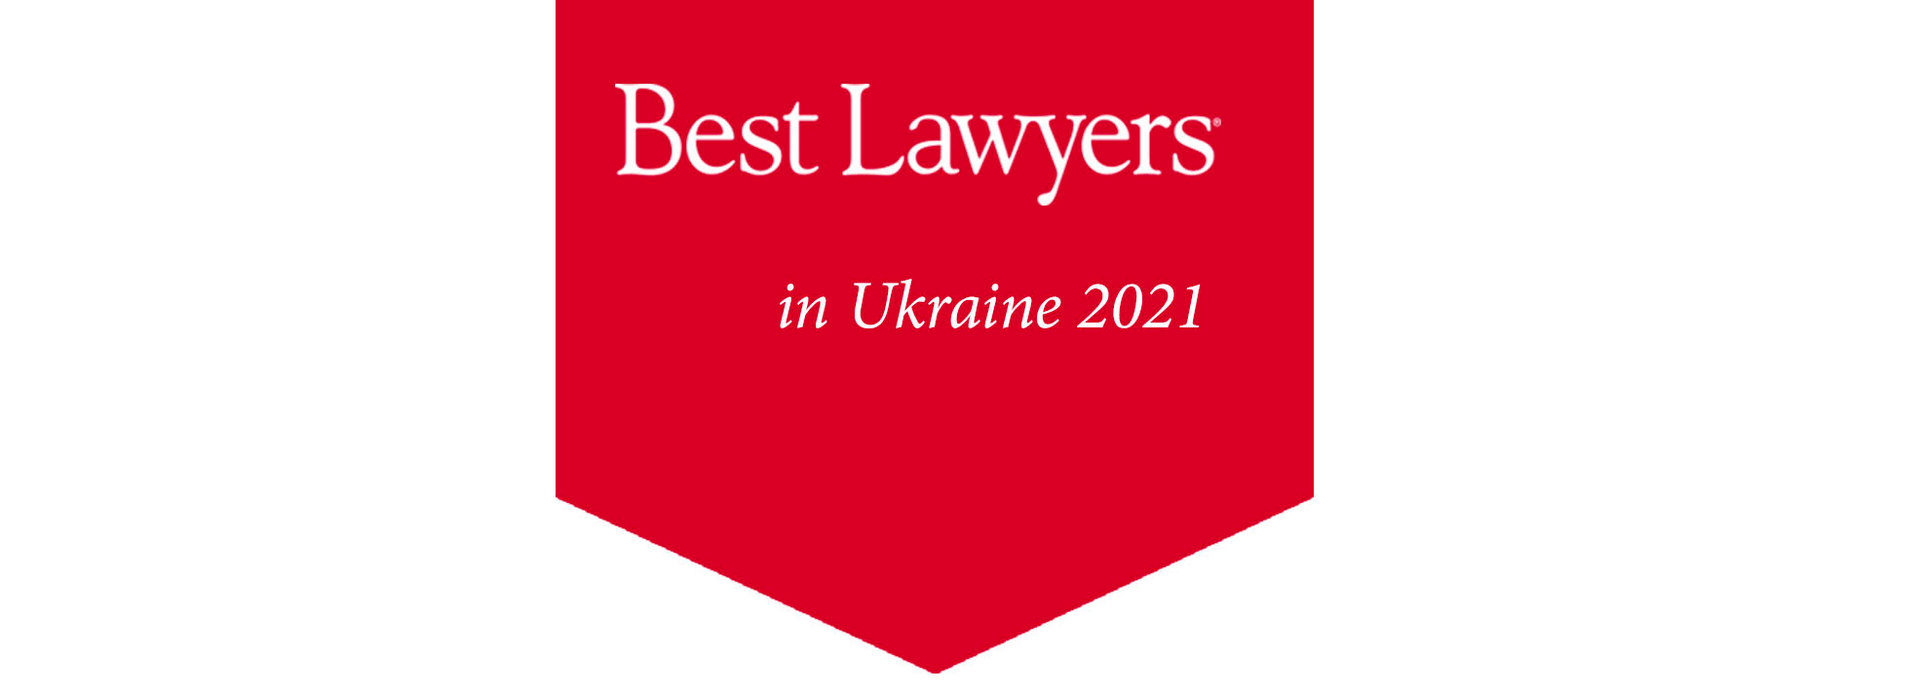 GOLAW Lawyers Have Been Listed Among the Top Professionals According to the International Legal Research the Best Lawyers in Ukraine